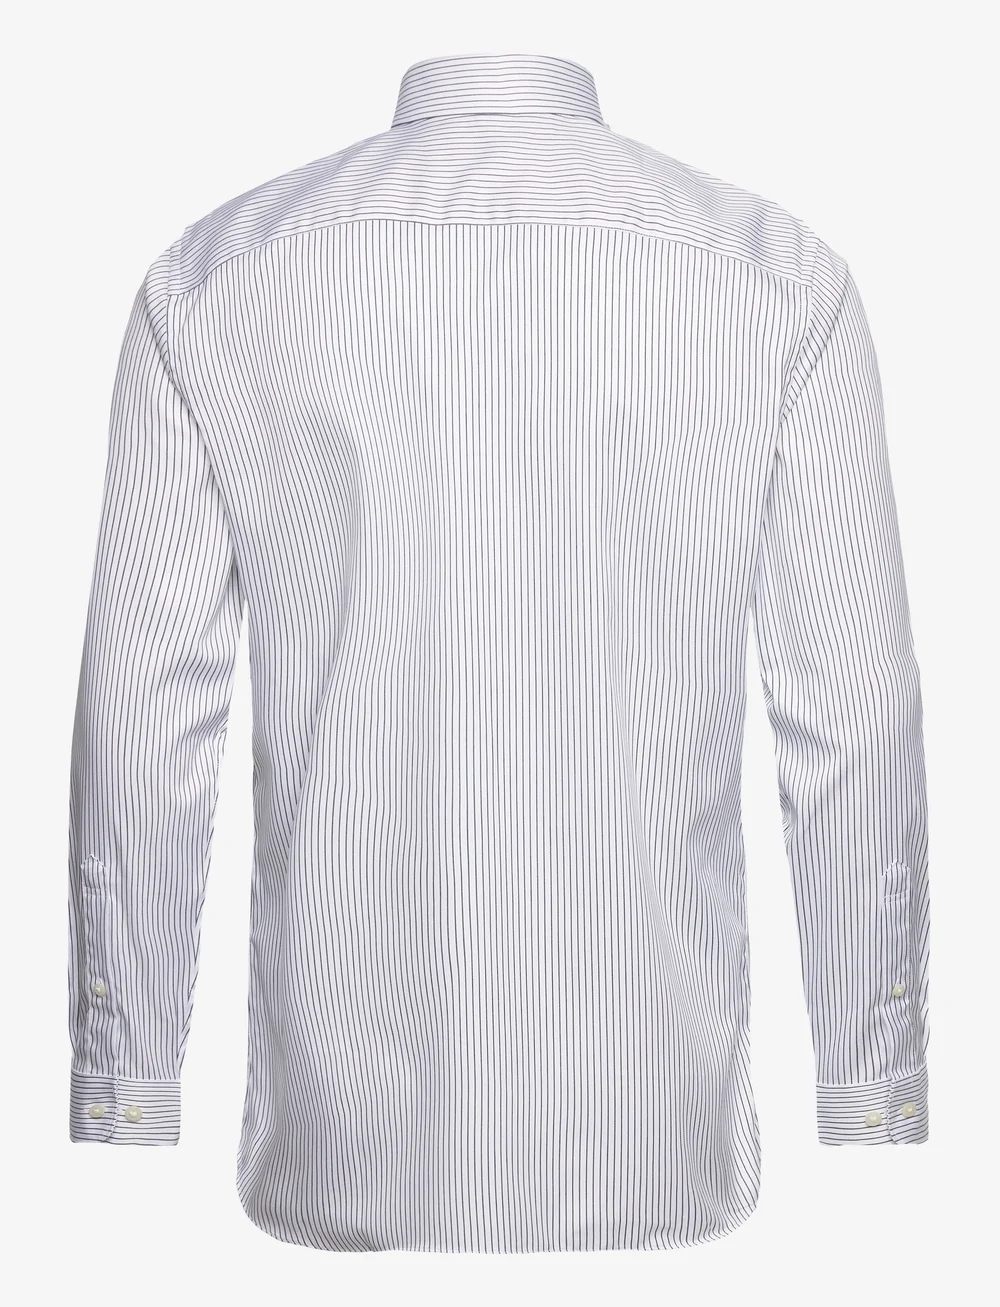 Selected Homme Slhslimethan Shirt Ls Classic – shirts – shop at Booztlet